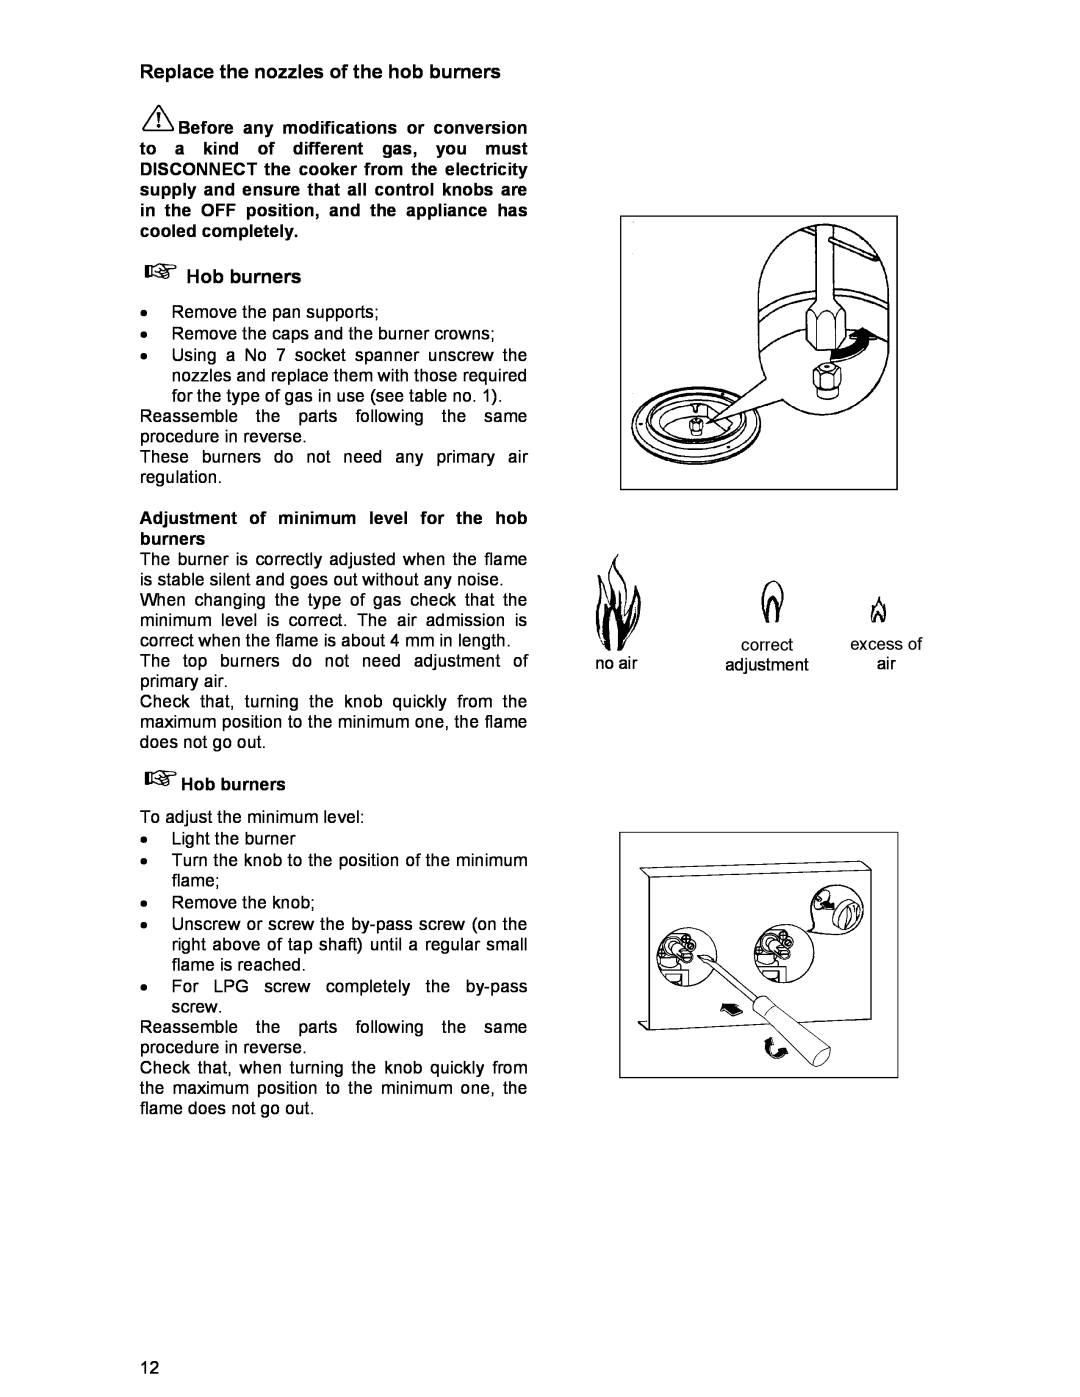 Electrolux DSO51DF manual Replace the nozzles of the hob burners, Hob burners, Adjustment of minimum level for the hob 